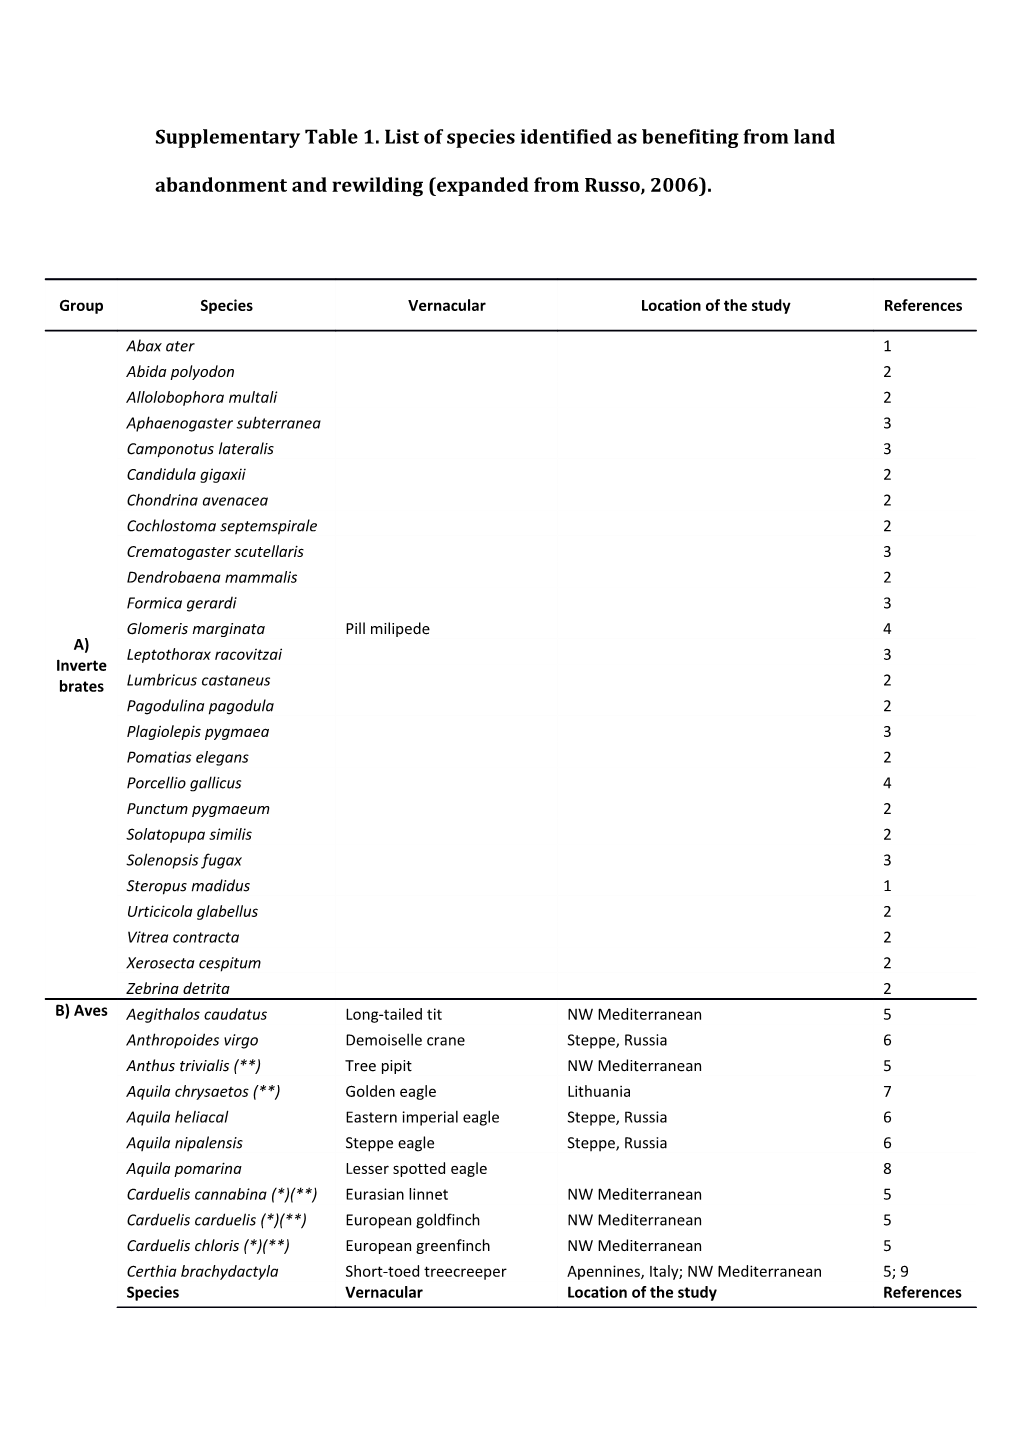 Supplementary Table 1. List of Species Identified As Benefiting from Land Abandonment